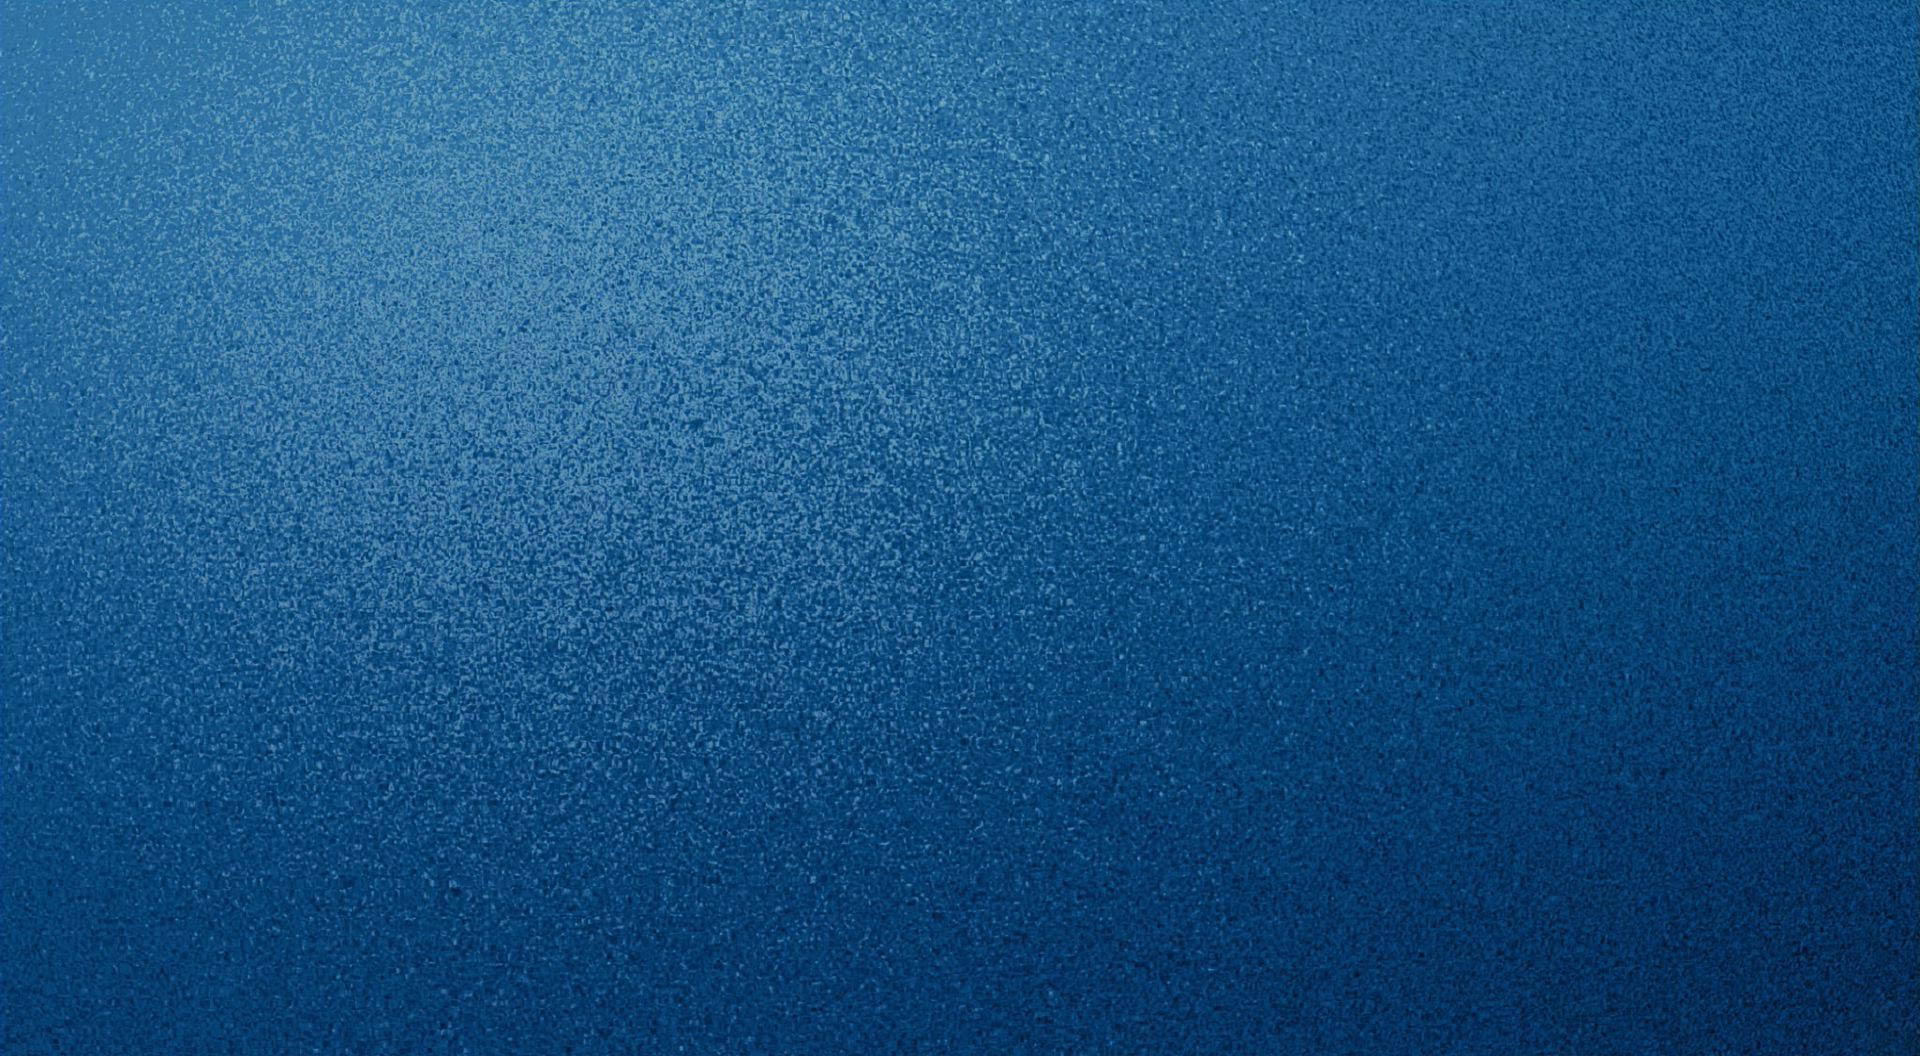 Blue textured speckled desktop background wallpaper for use with Mac 1920x1056